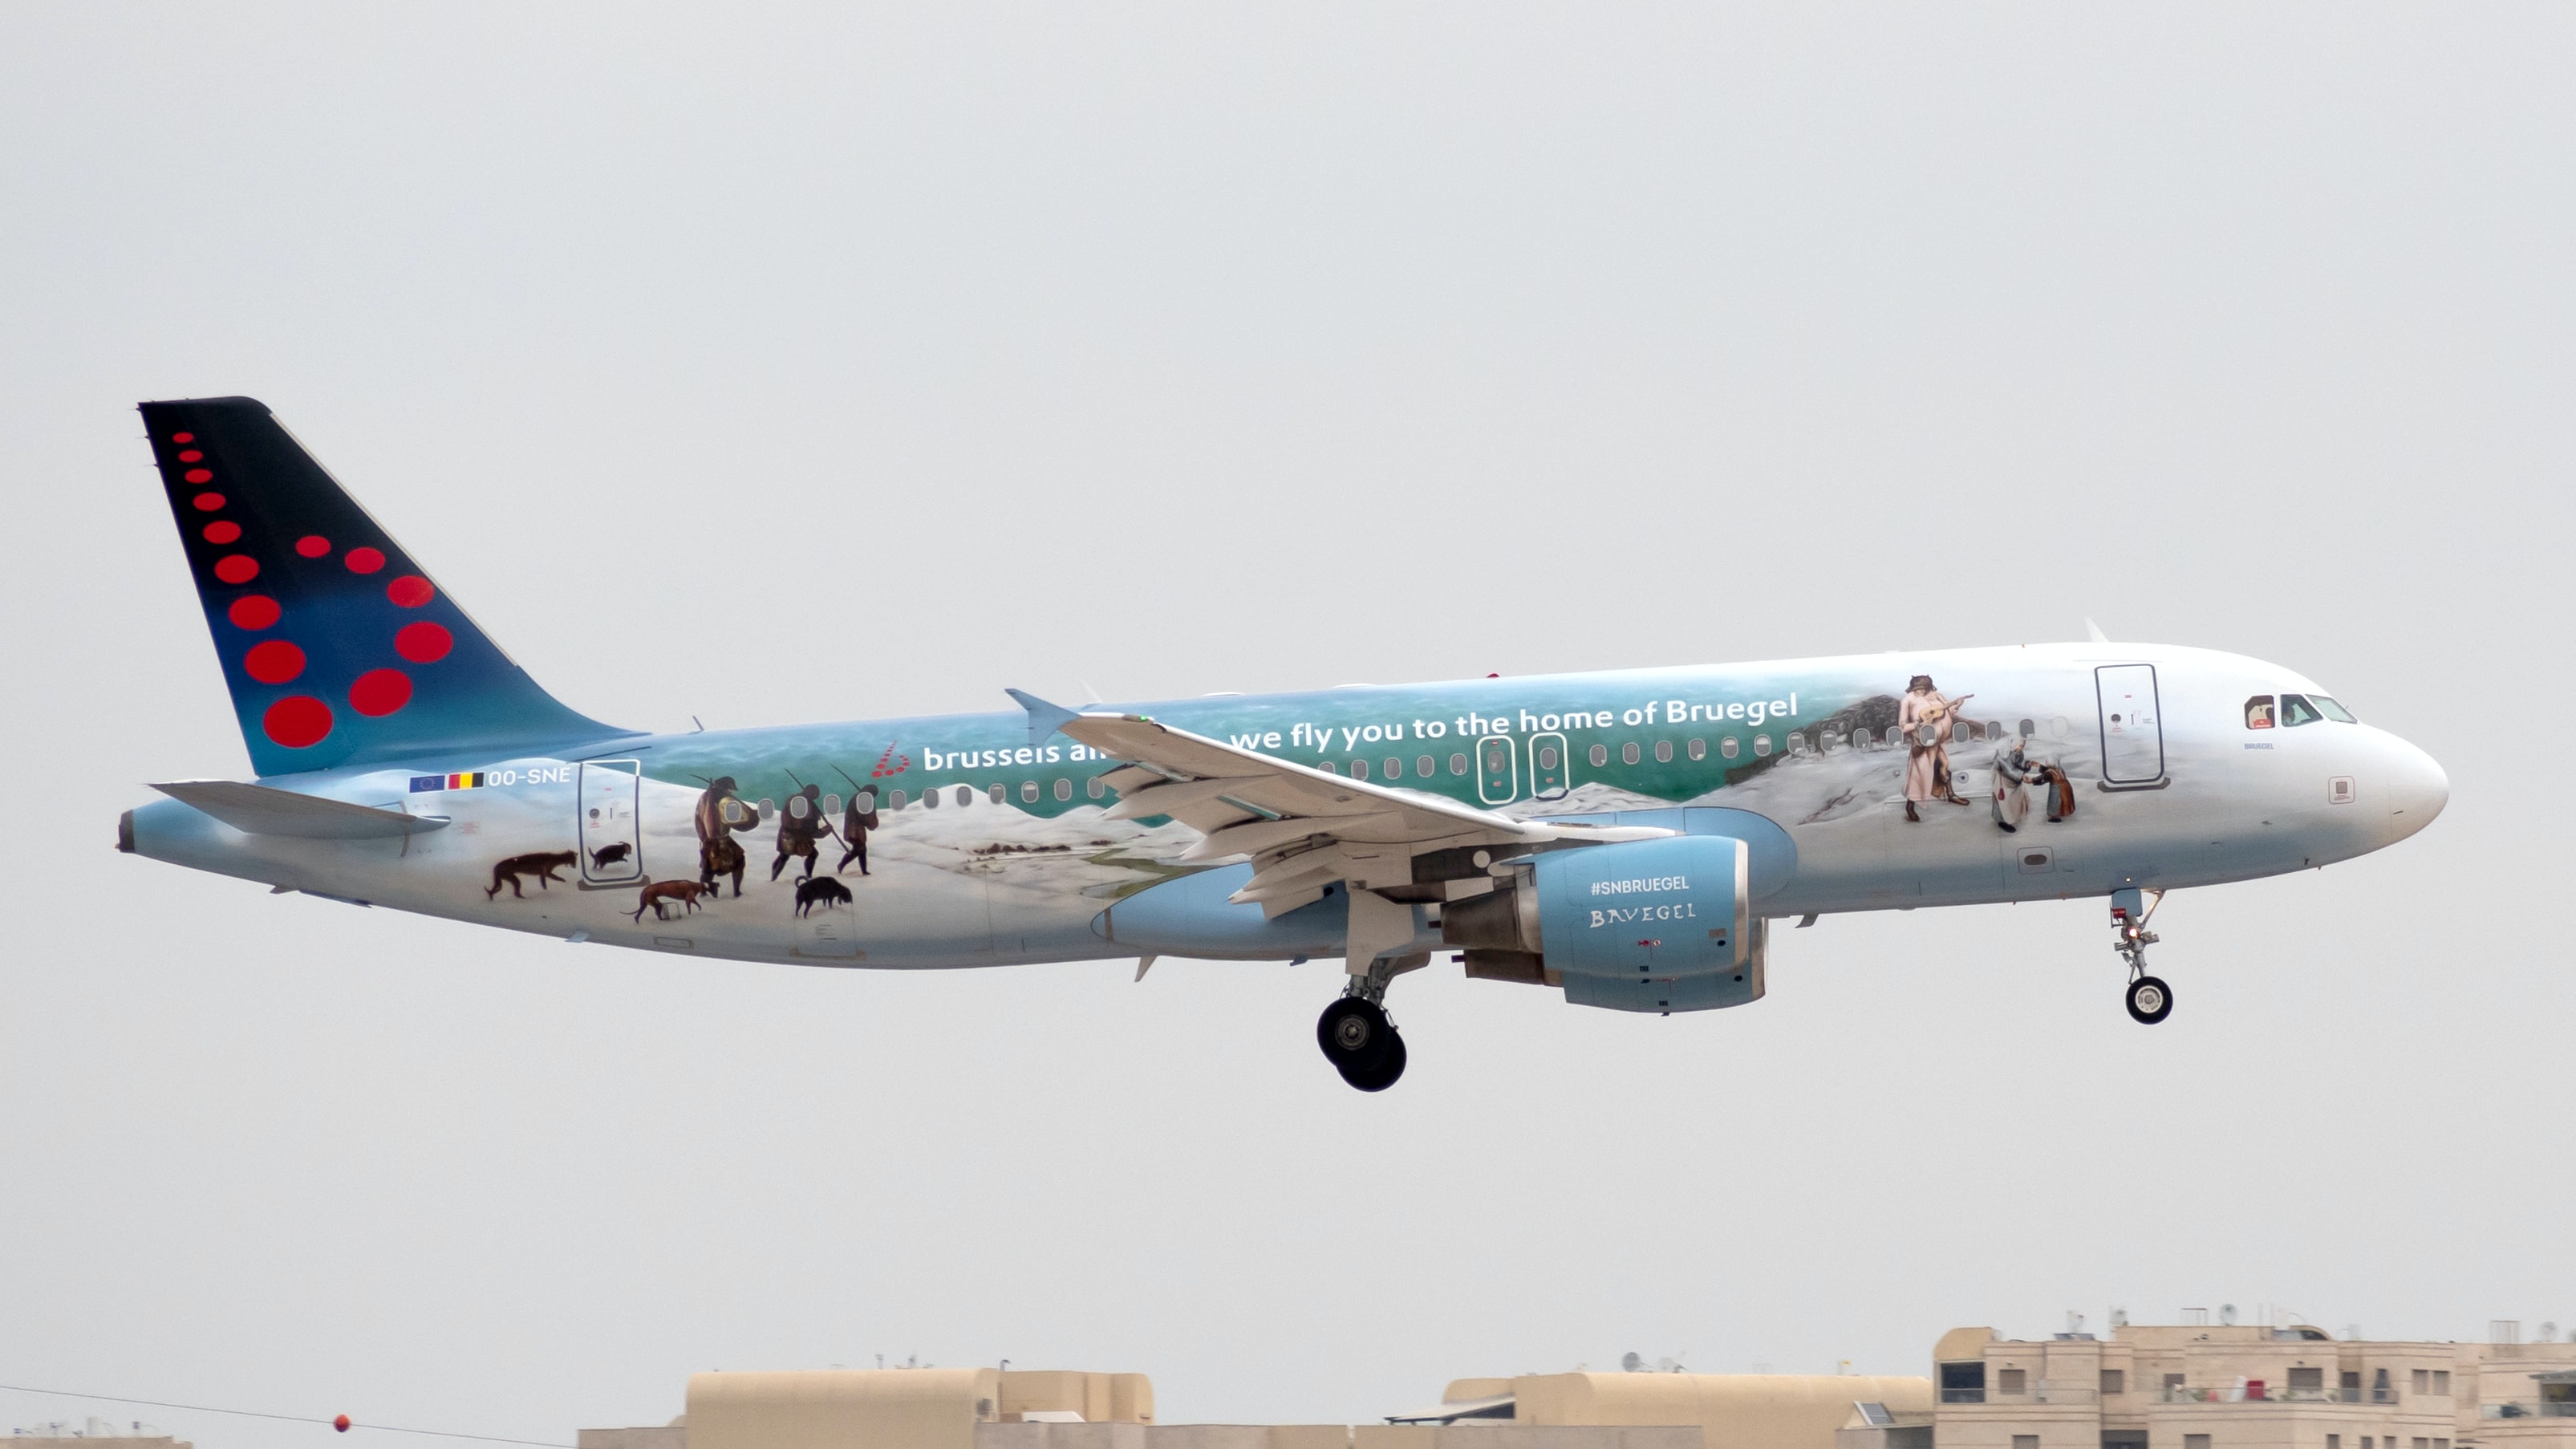 Brussels Airlines Airbus 320, painted with the Bruegel Livery. Taken at Ben Gurion airport.